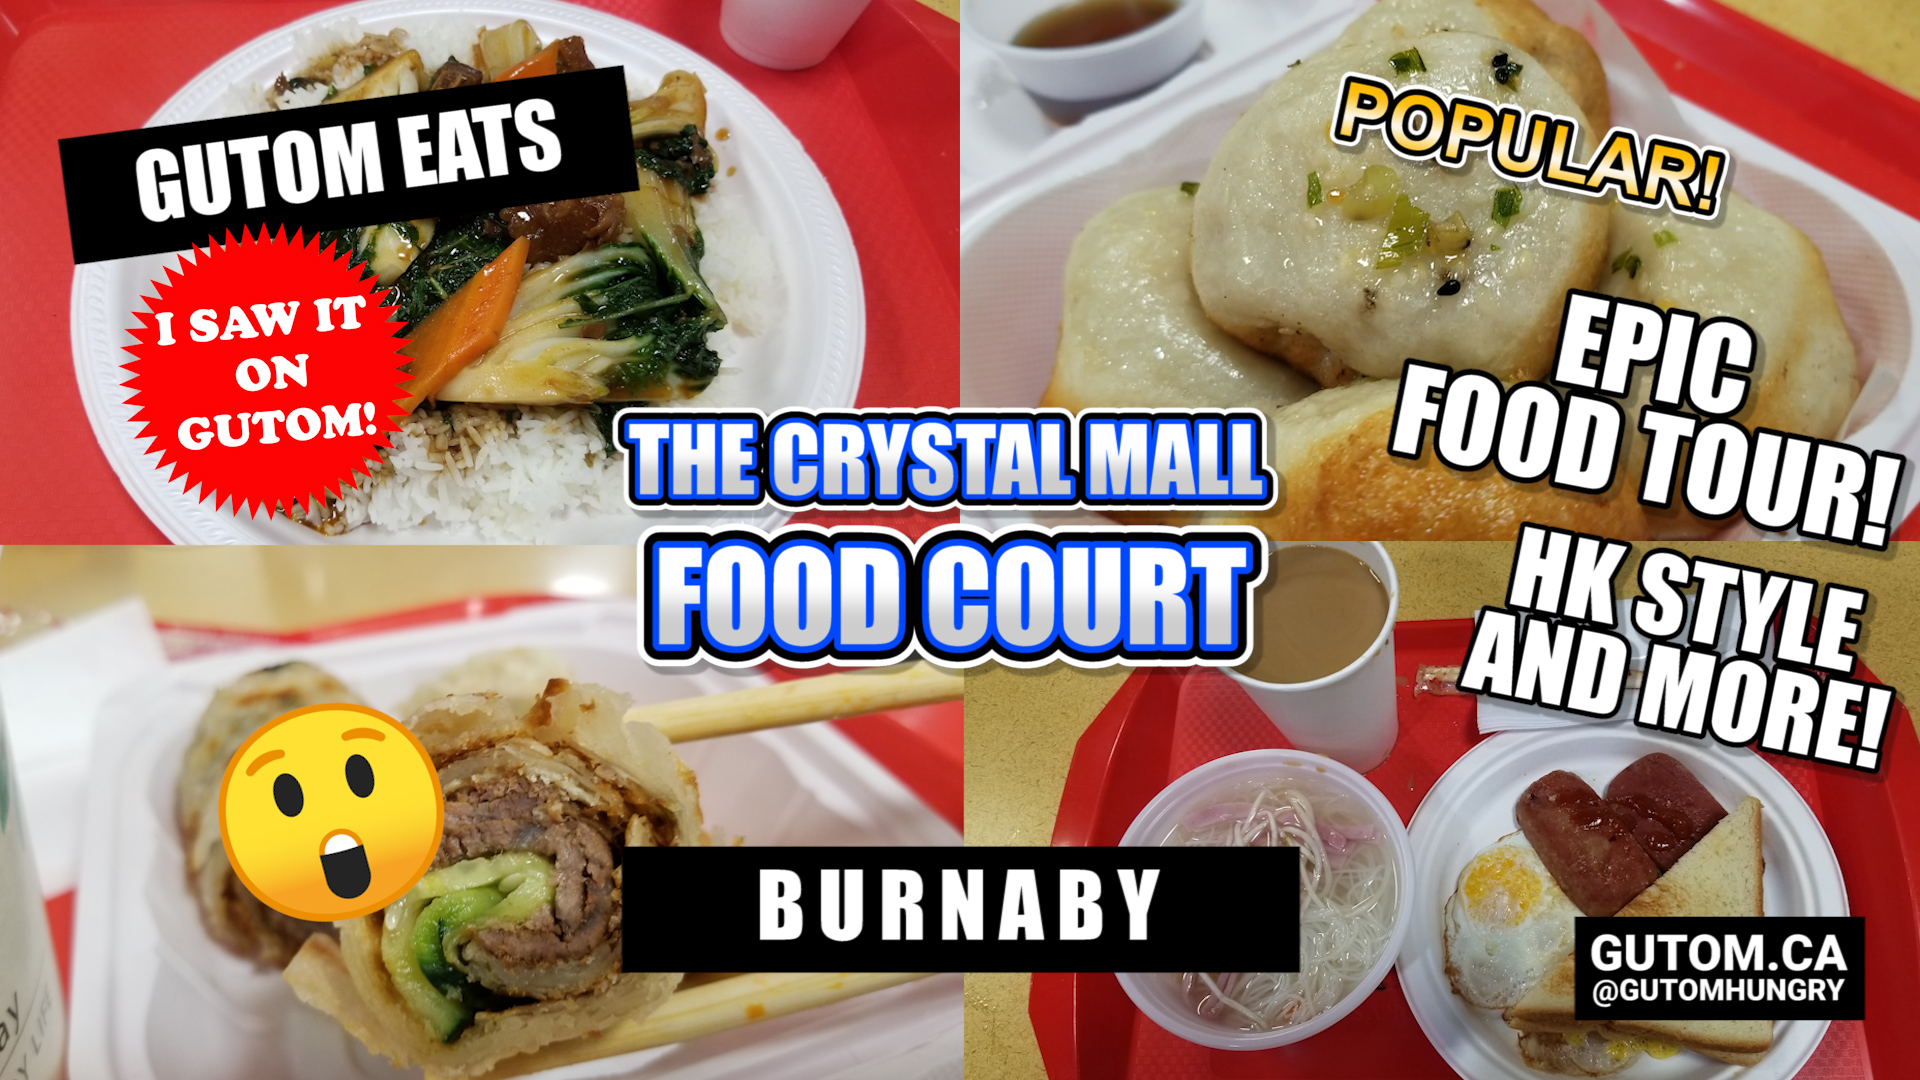 EPIC FOOD TOUR AT THE CRYSTAL MALL ASIAN FOOD COURT BURNABY KINGSWAY